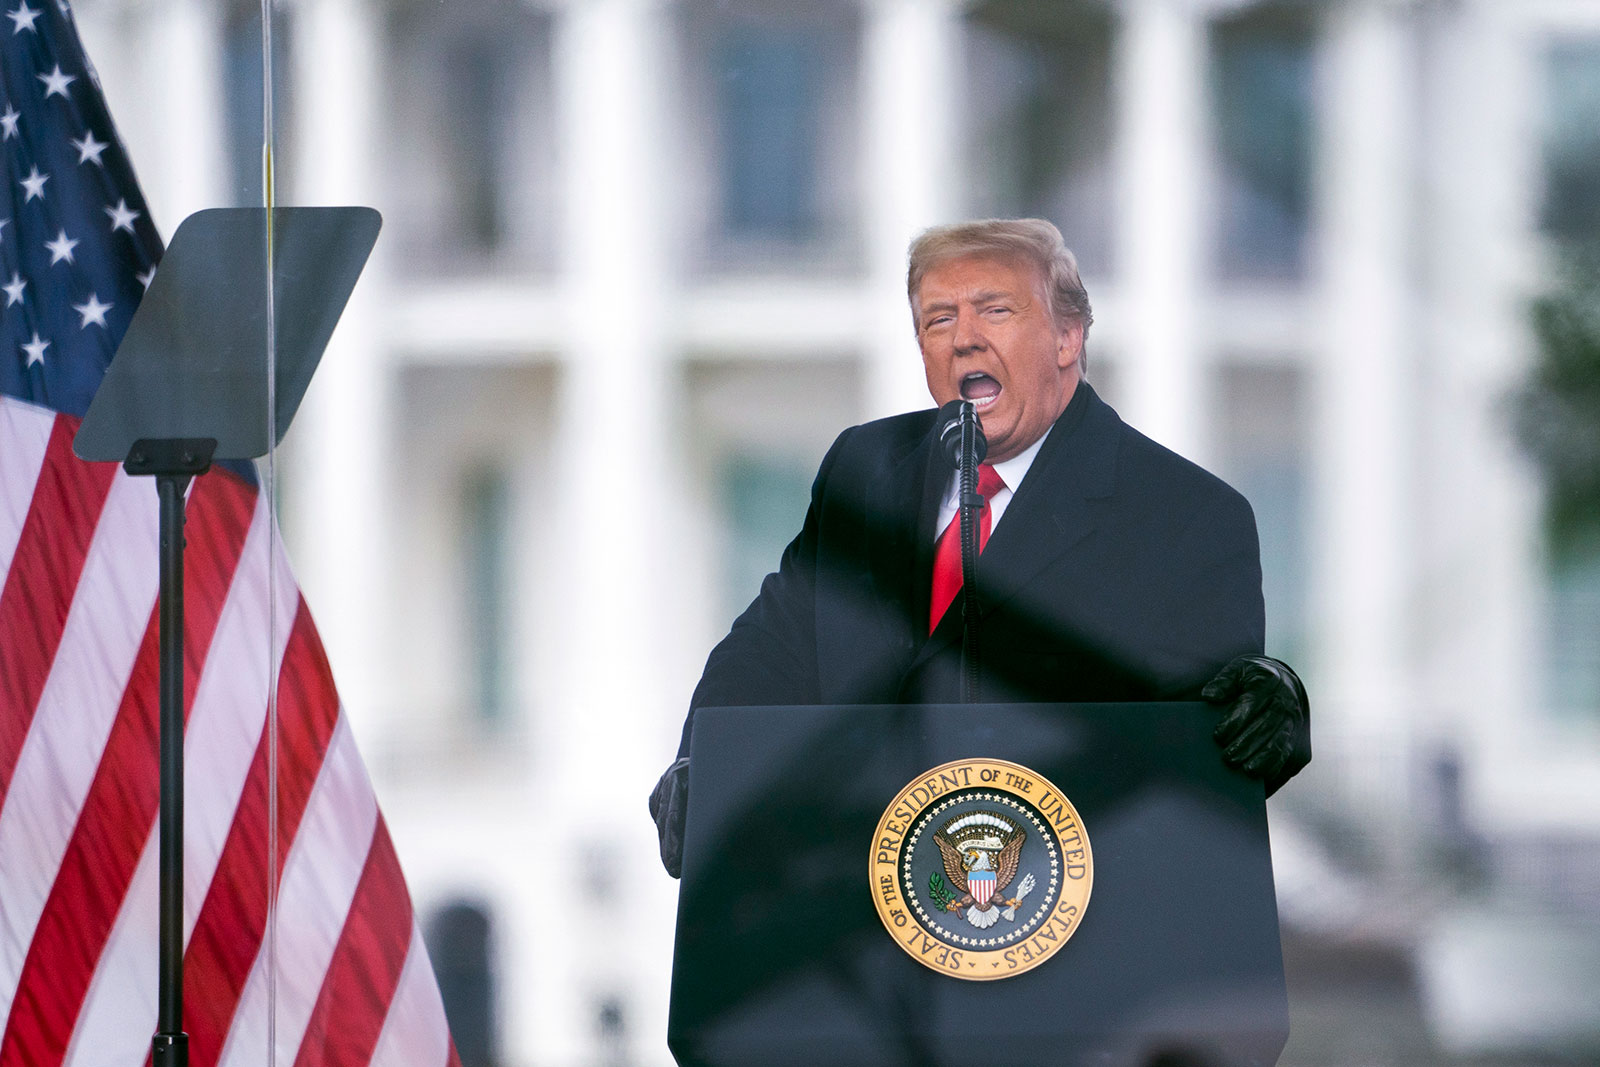 Then-President Donald Trump speaks during a rally in Washington, DC, on January 6, 2021.